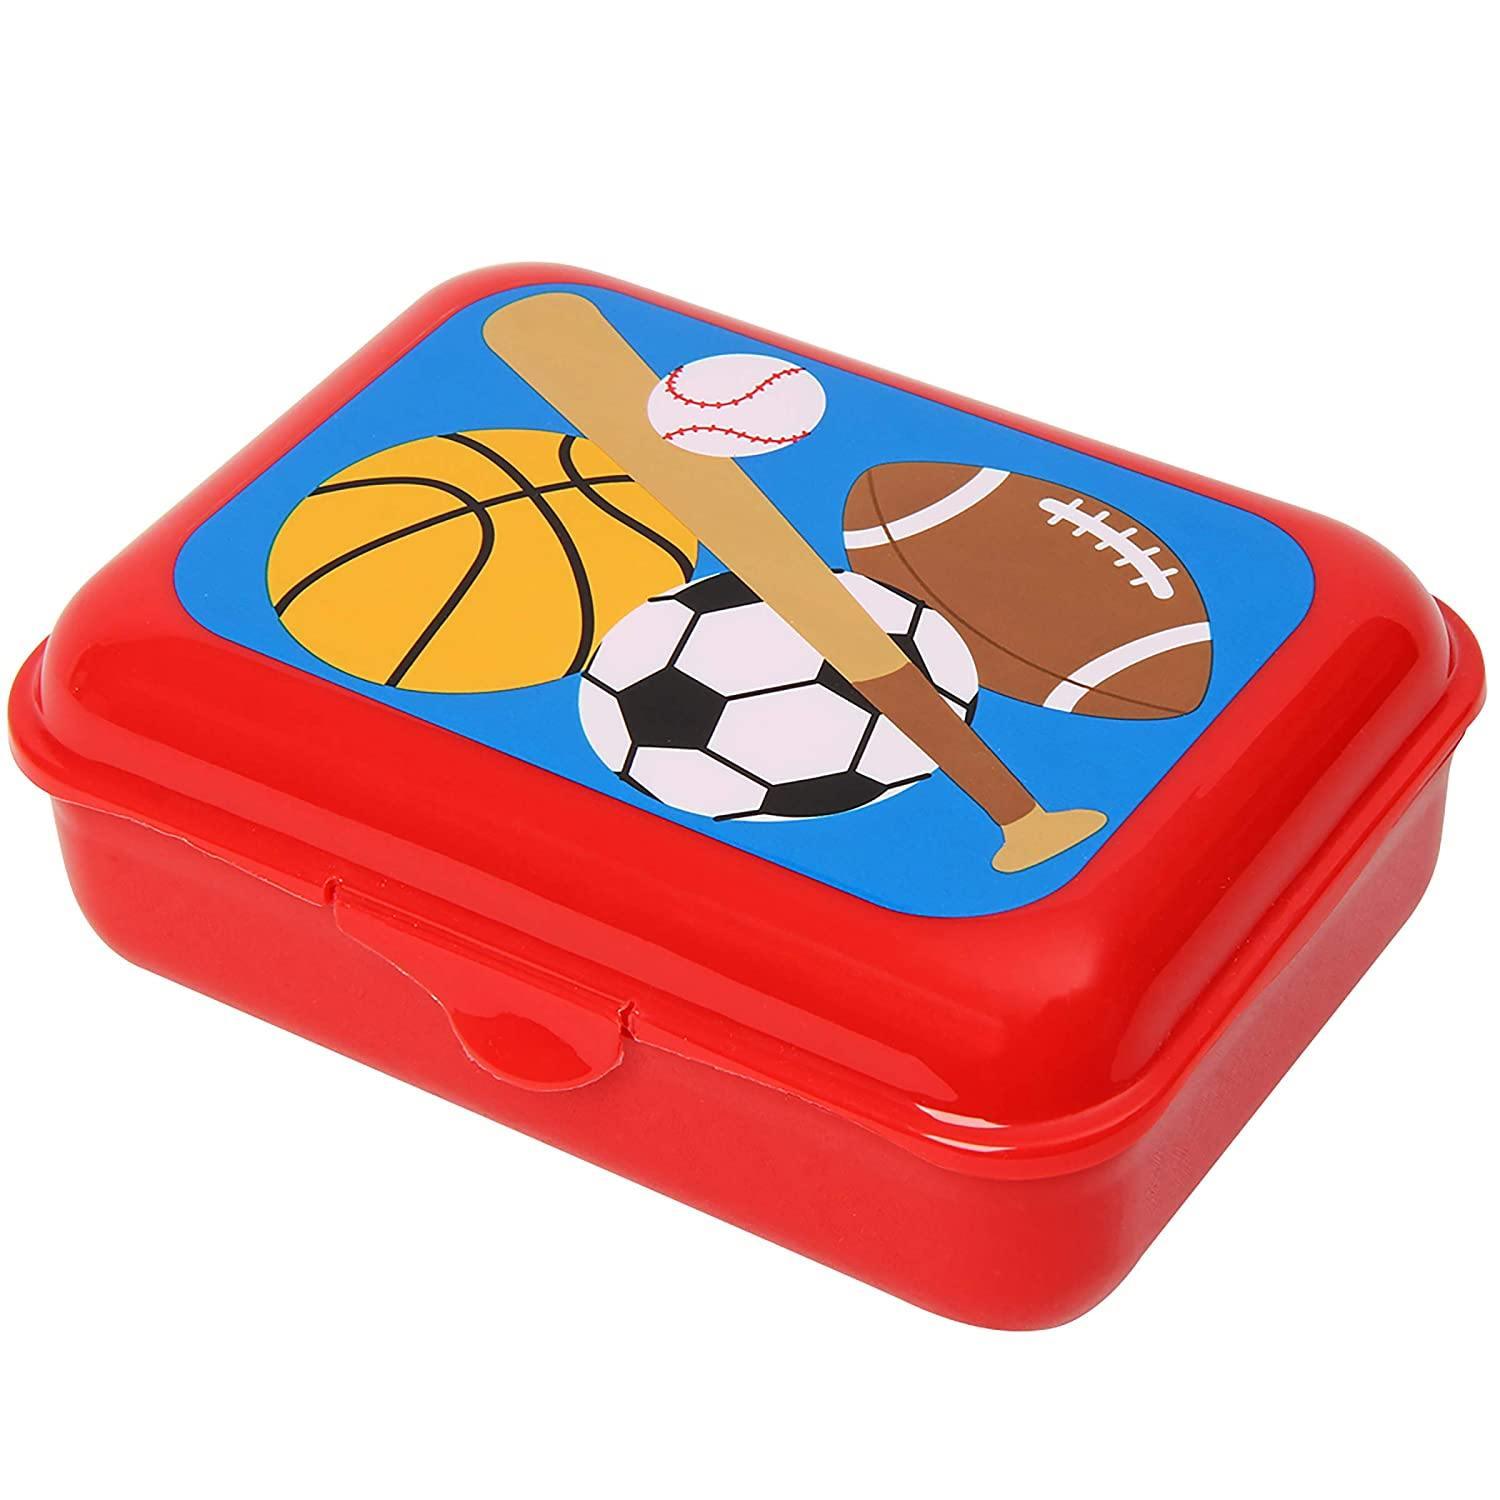 Stephen Joseph Snack Box Sports - BumbleToys - 2-4 Years, 5-7 Years, Boys, Cecil, Lunch Box, Pre-Order, School Supplies